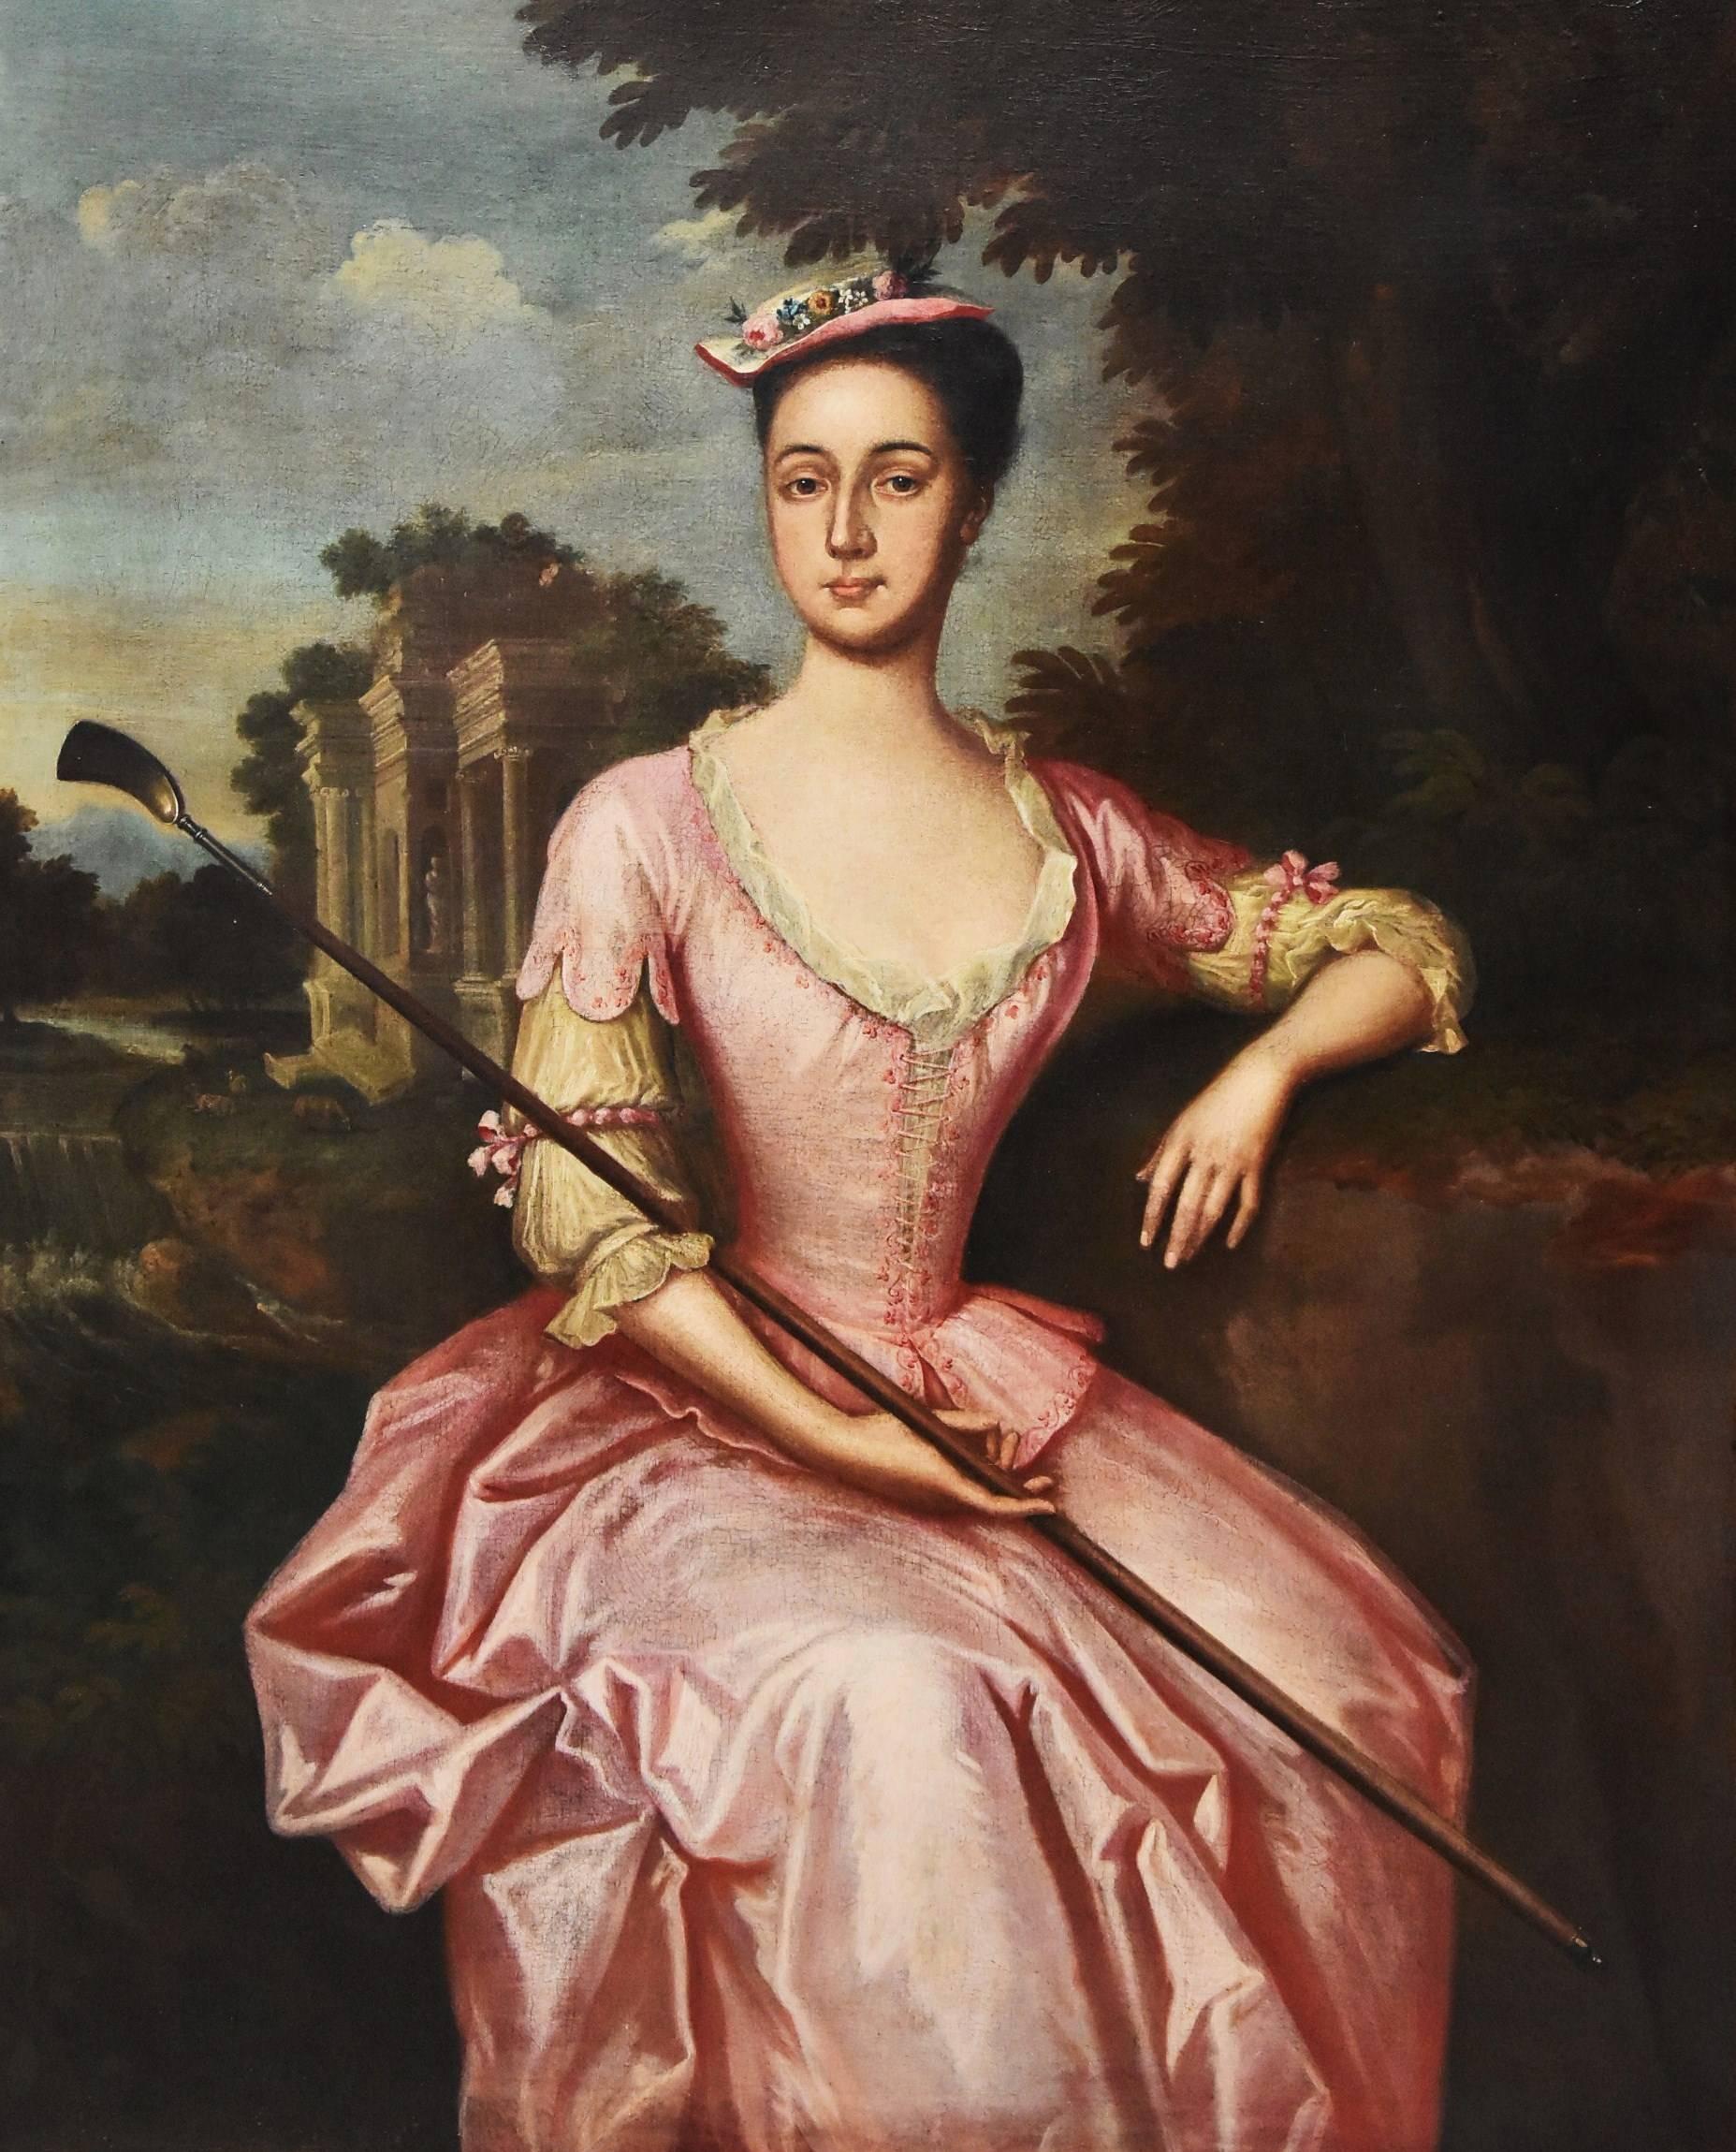 A large 18th century portrait, oil on canvas, circa 1780, of a young woman, believed to be Mary Yeats, daughter of John and Sarah Yeats, the painting attributed to John Lewis (British 1744-1780).               

The young woman, seated and holding